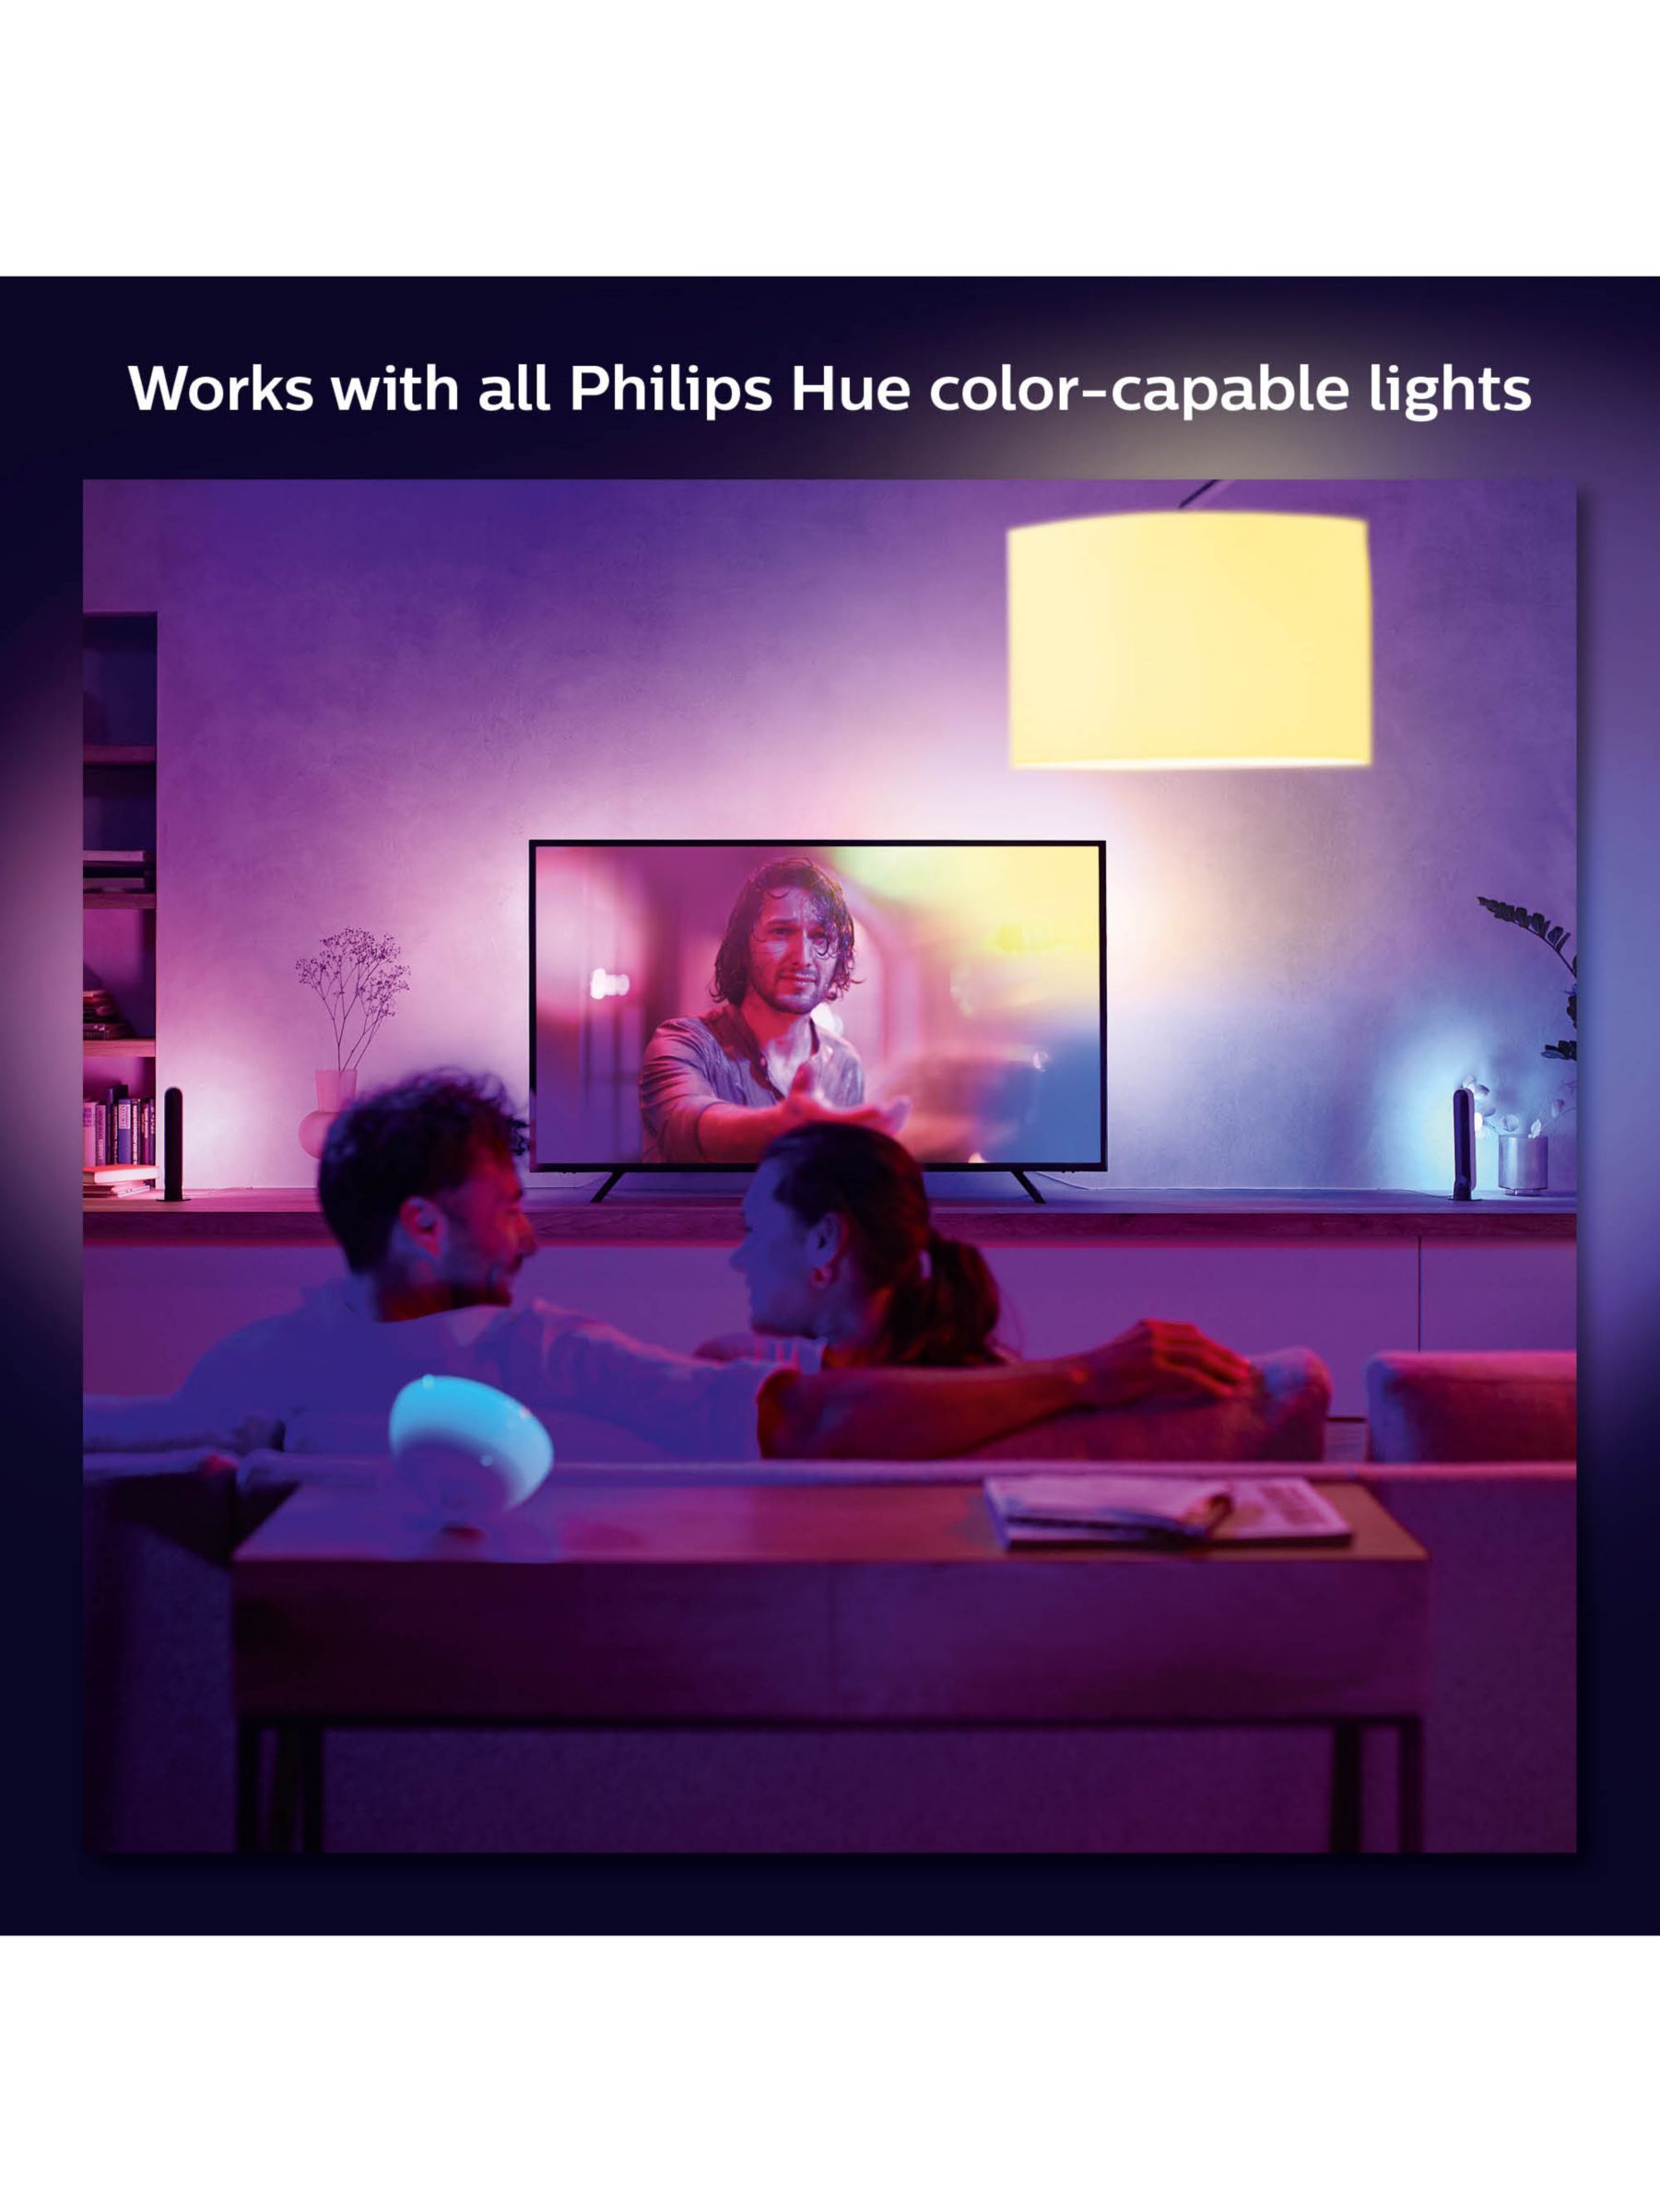 Hue Play Gradient Lightstrip 65 inch for your TV | Philips Hue US